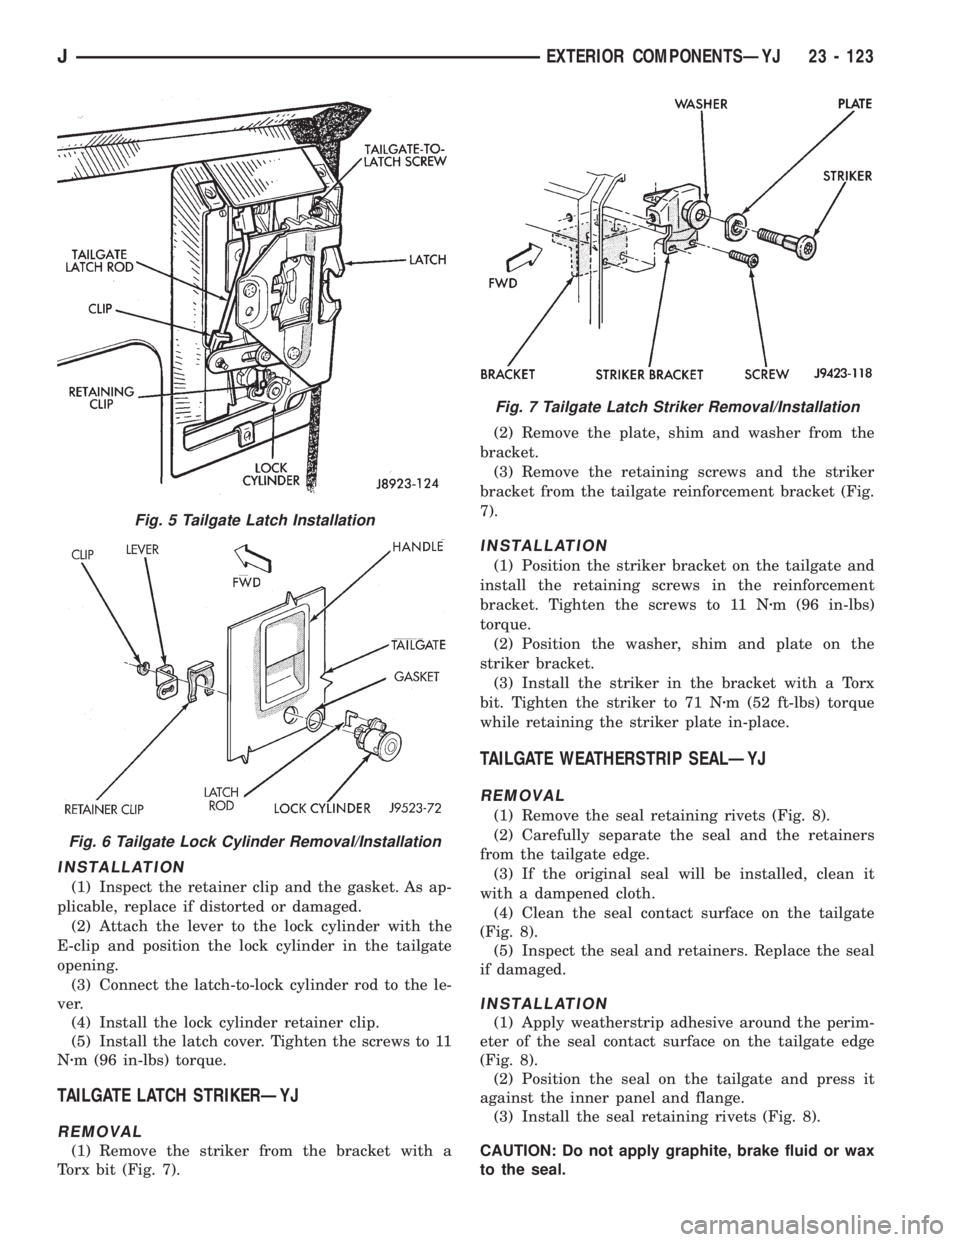 JEEP WRANGLER 1995  Owners Manual Fig. 5 Tailgate Latch Installation
Fig. 6 Tailgate Lock Cylinder Removal/Installation
Fig. 7 Tailgate Latch Striker Removal/Installation
JEXTERIOR COMPONENTSÐYJ 23 - 123 